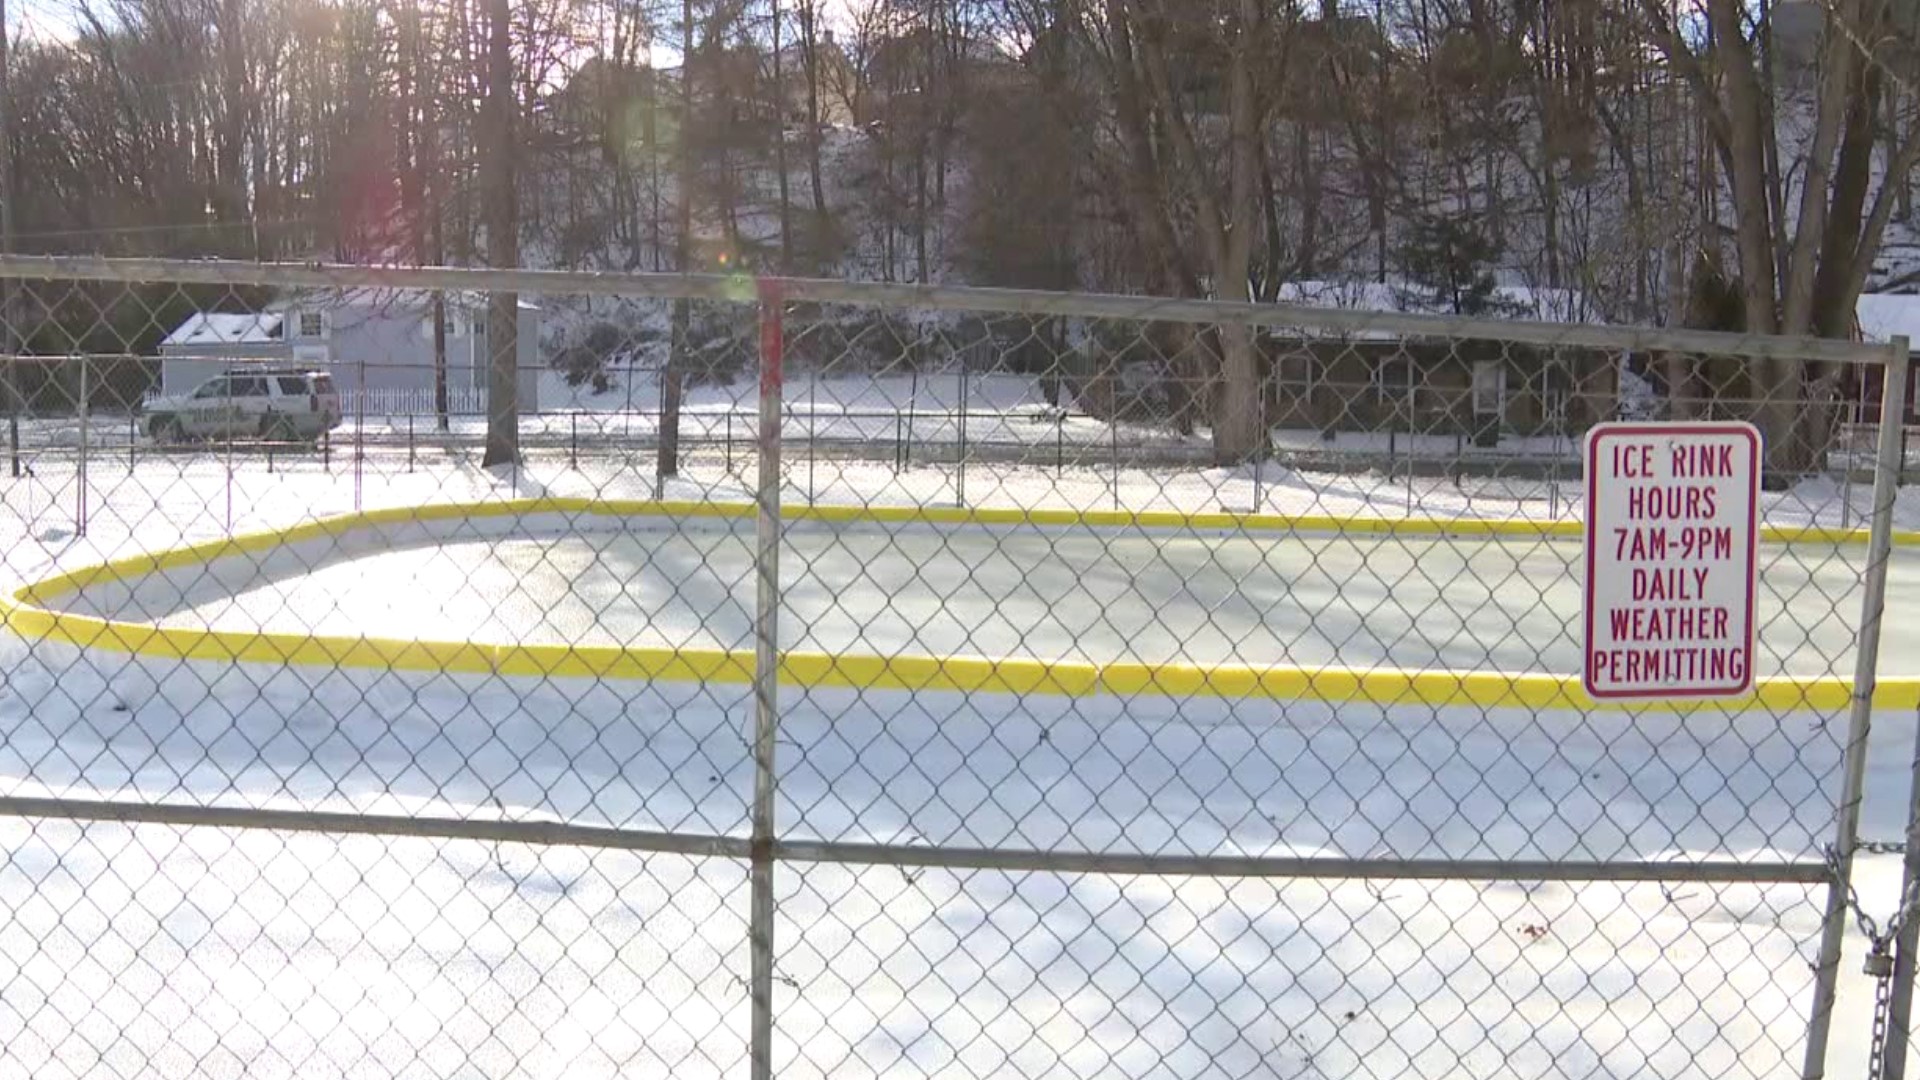 The rink is located at Helen Amhurst Park on North 3rd Street.